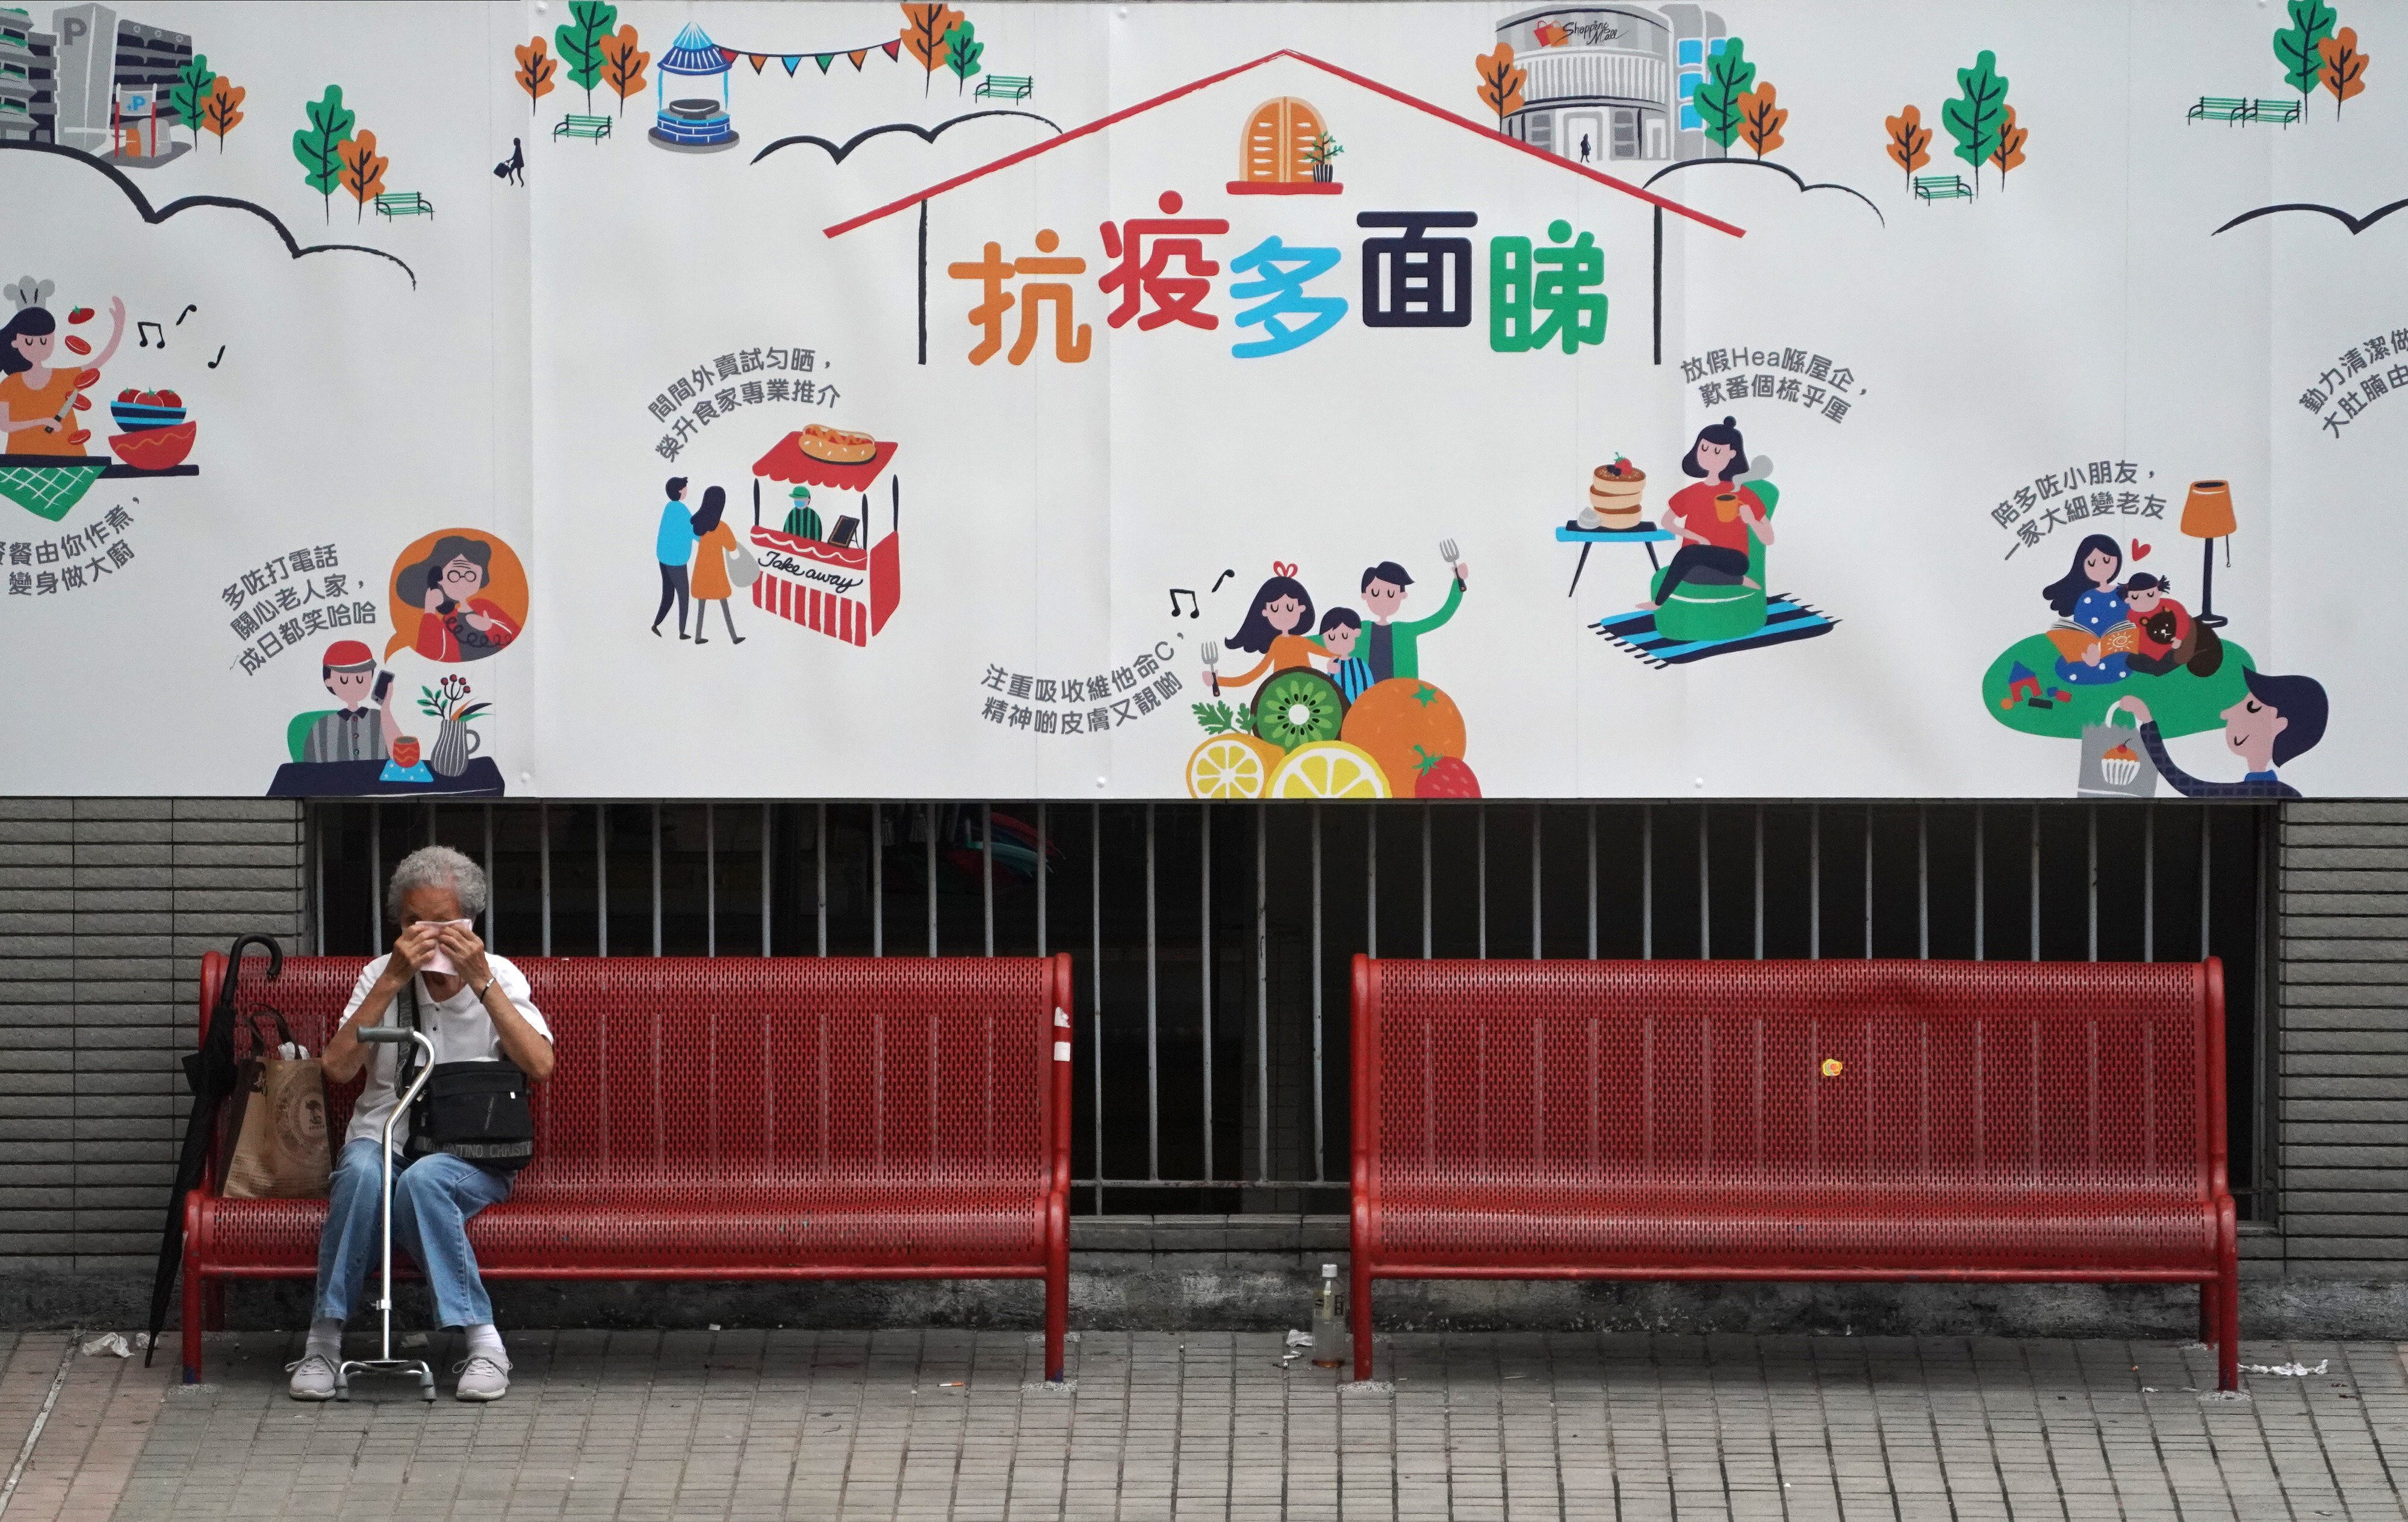 An elderly woman sits alone on a bench in Sha Tin on August 28, 2020. Living alone, being a woman and being widowed have all been identified as risk factors for at-home suicide. Photo: Felix Wong